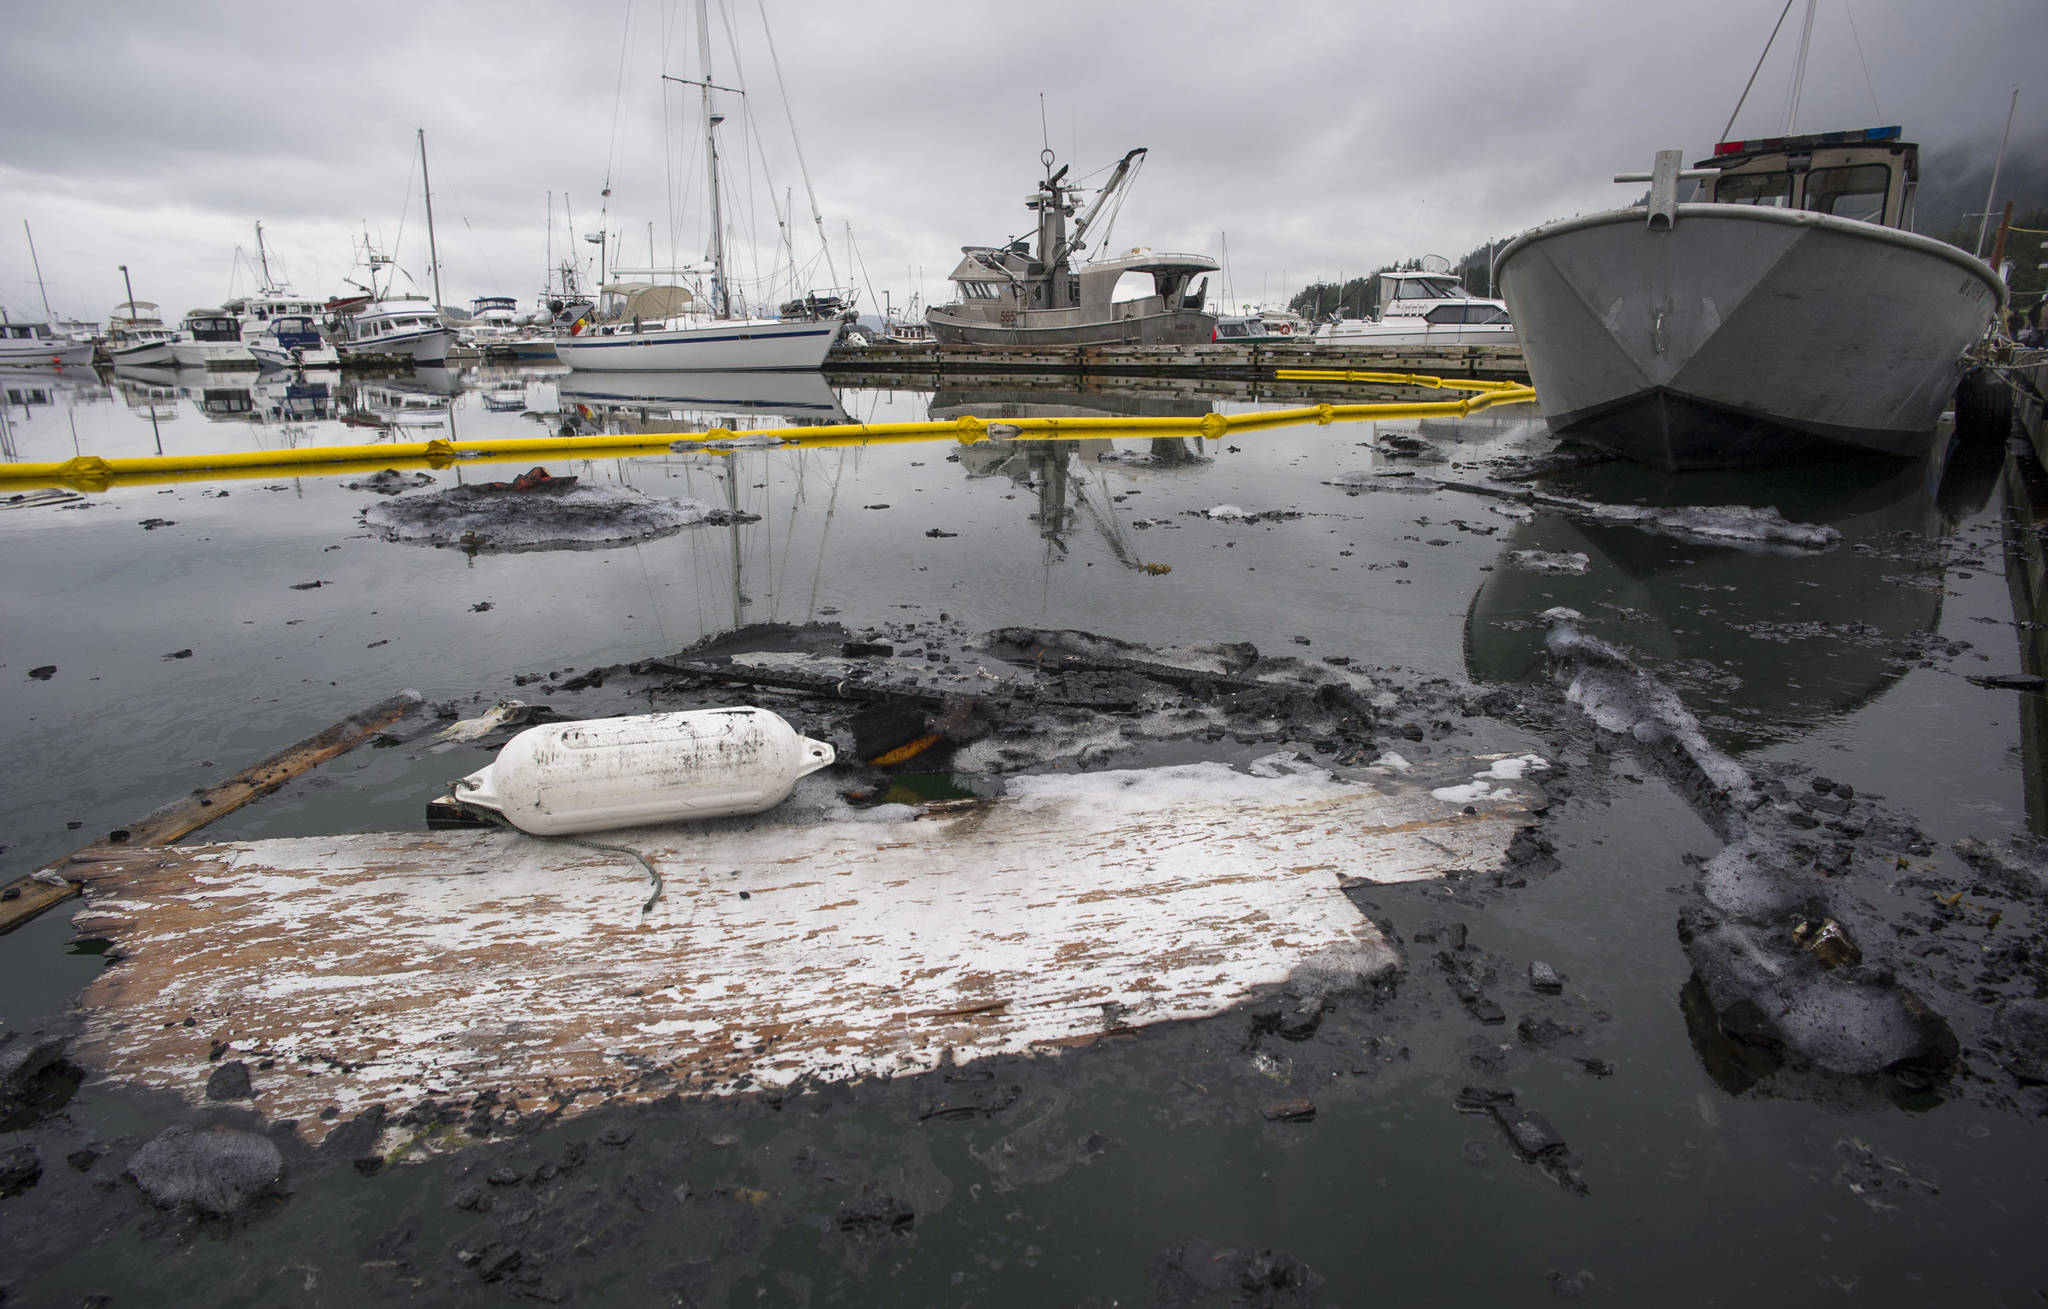 The charred remains, debris and fuel float in the Don D. Statter Memorial Boat Harbor in Auke Bay on Tuesday, June 27, 2017. One boat occupant was taken to the hospital for smoke inhalation after a boat in Auke Bay caught fire and sank Tuesday morning. (Michael Penn | Juneau Empire)